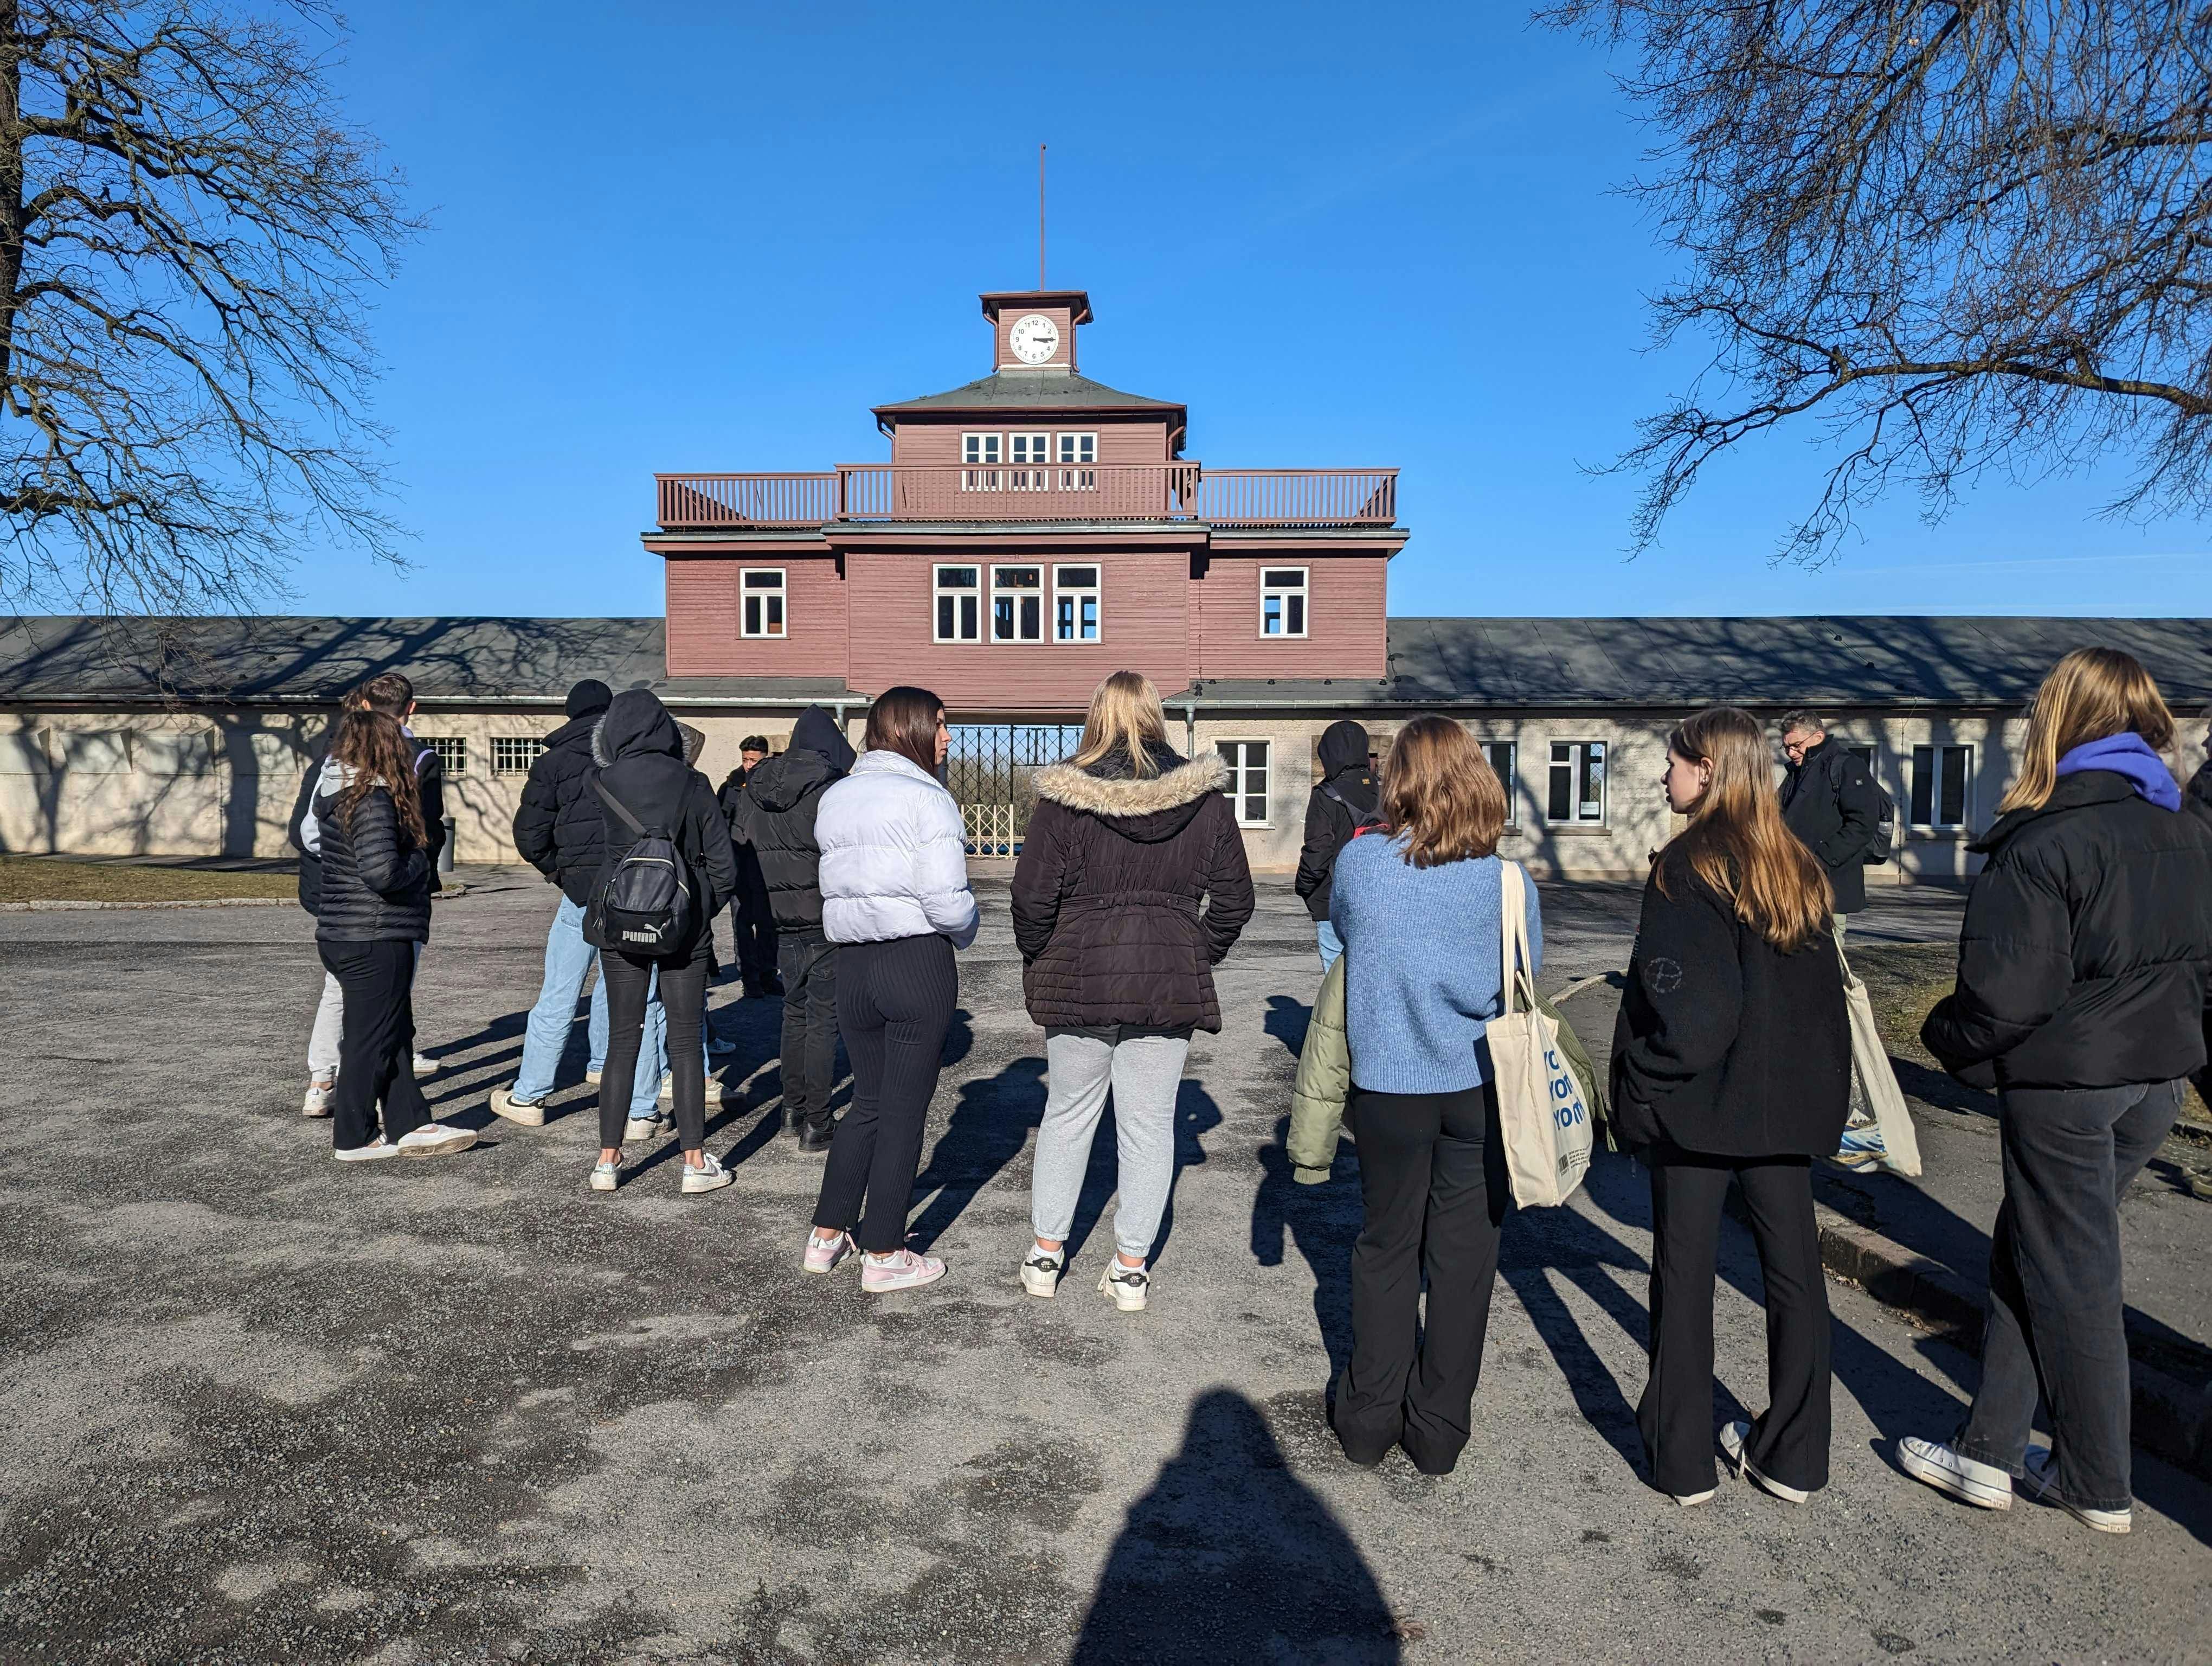 A group of young people in front of the entrance gate to the Buchenwald Memorial